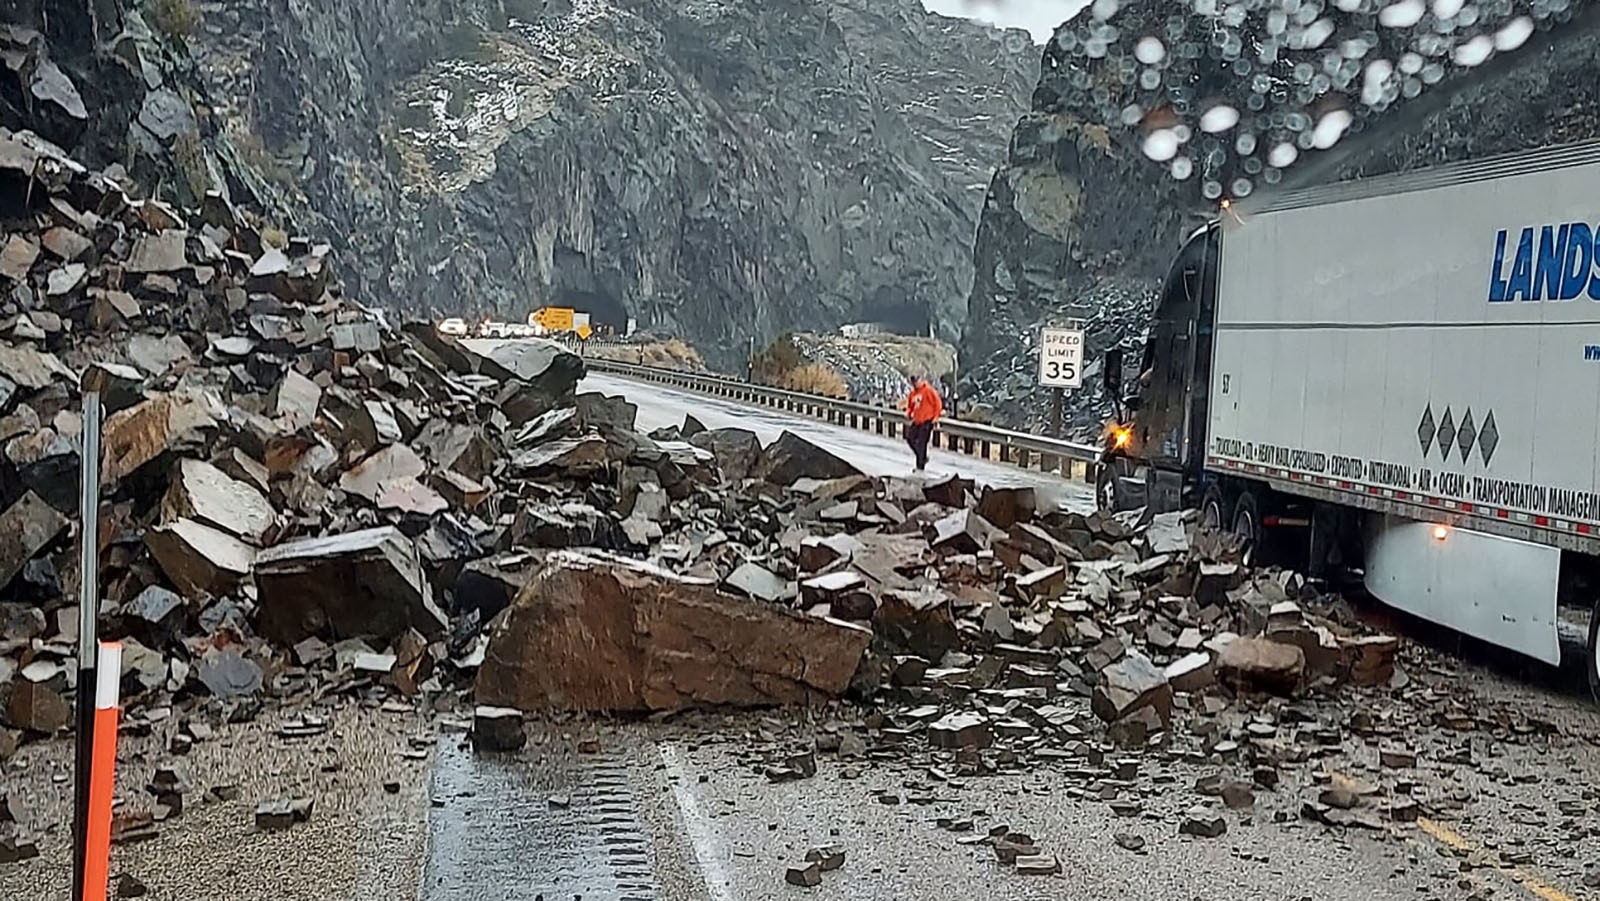 Springtime is also known as "rockfall season" through Wind River Canyon in central Wyoming. So far this year, rockfall season has been pretty quiet.